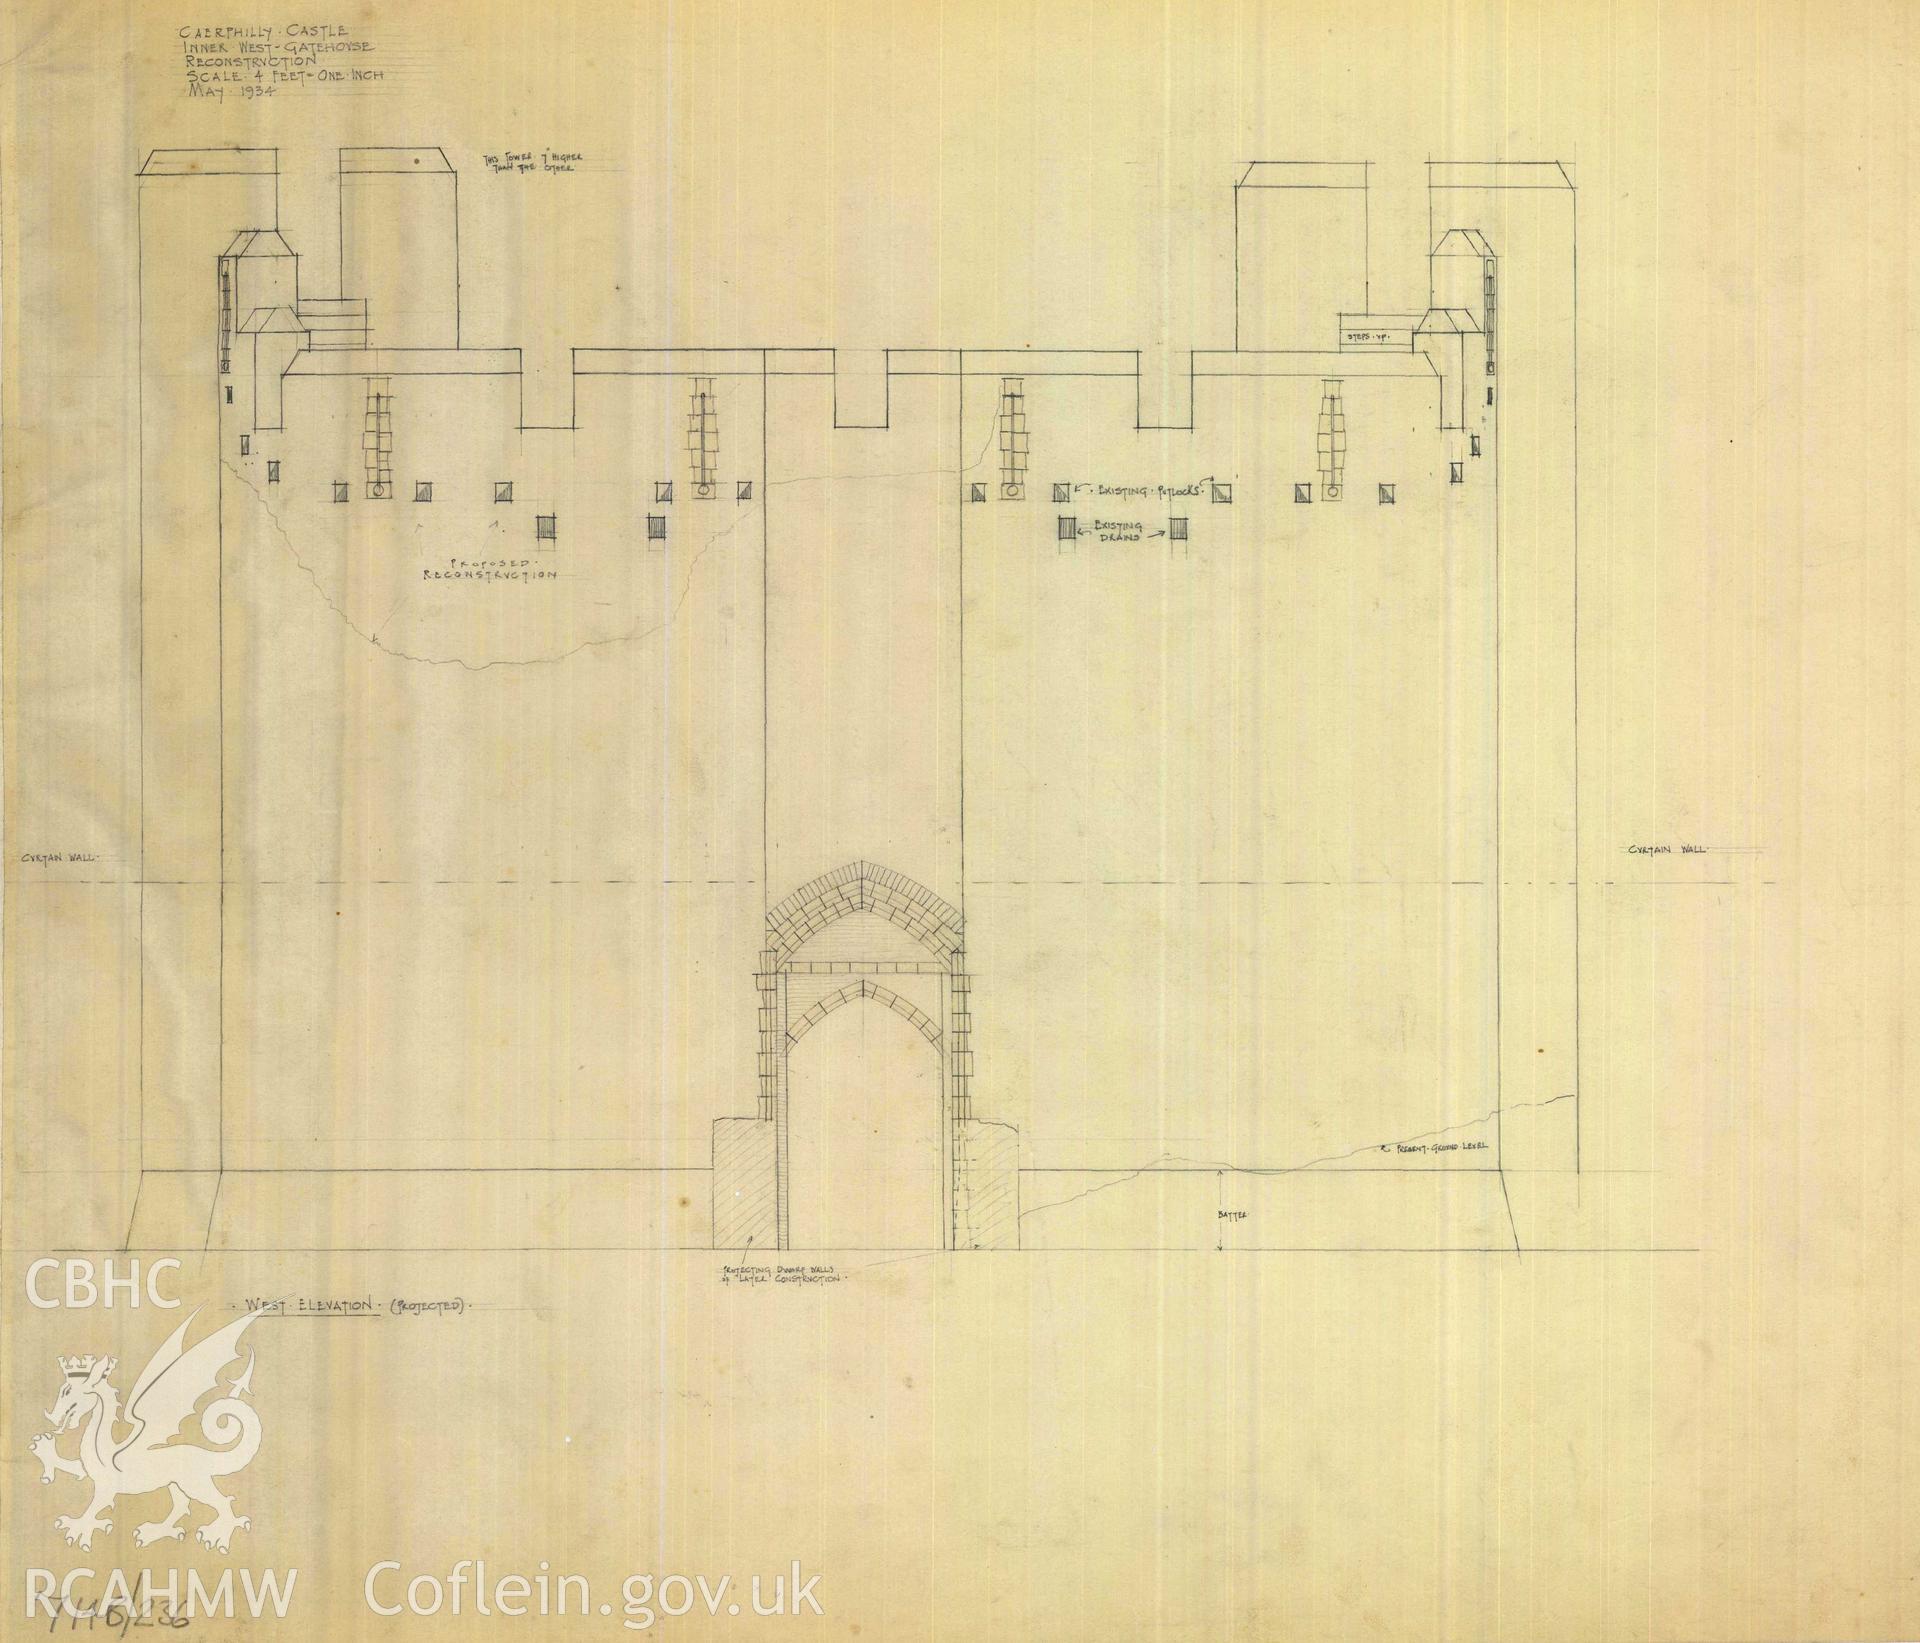 Cadw guardianship monument drawing of Caerphilly Castle. Inner W gate, W elev. Cadw Ref. No:714B/236. Scale 1:48.